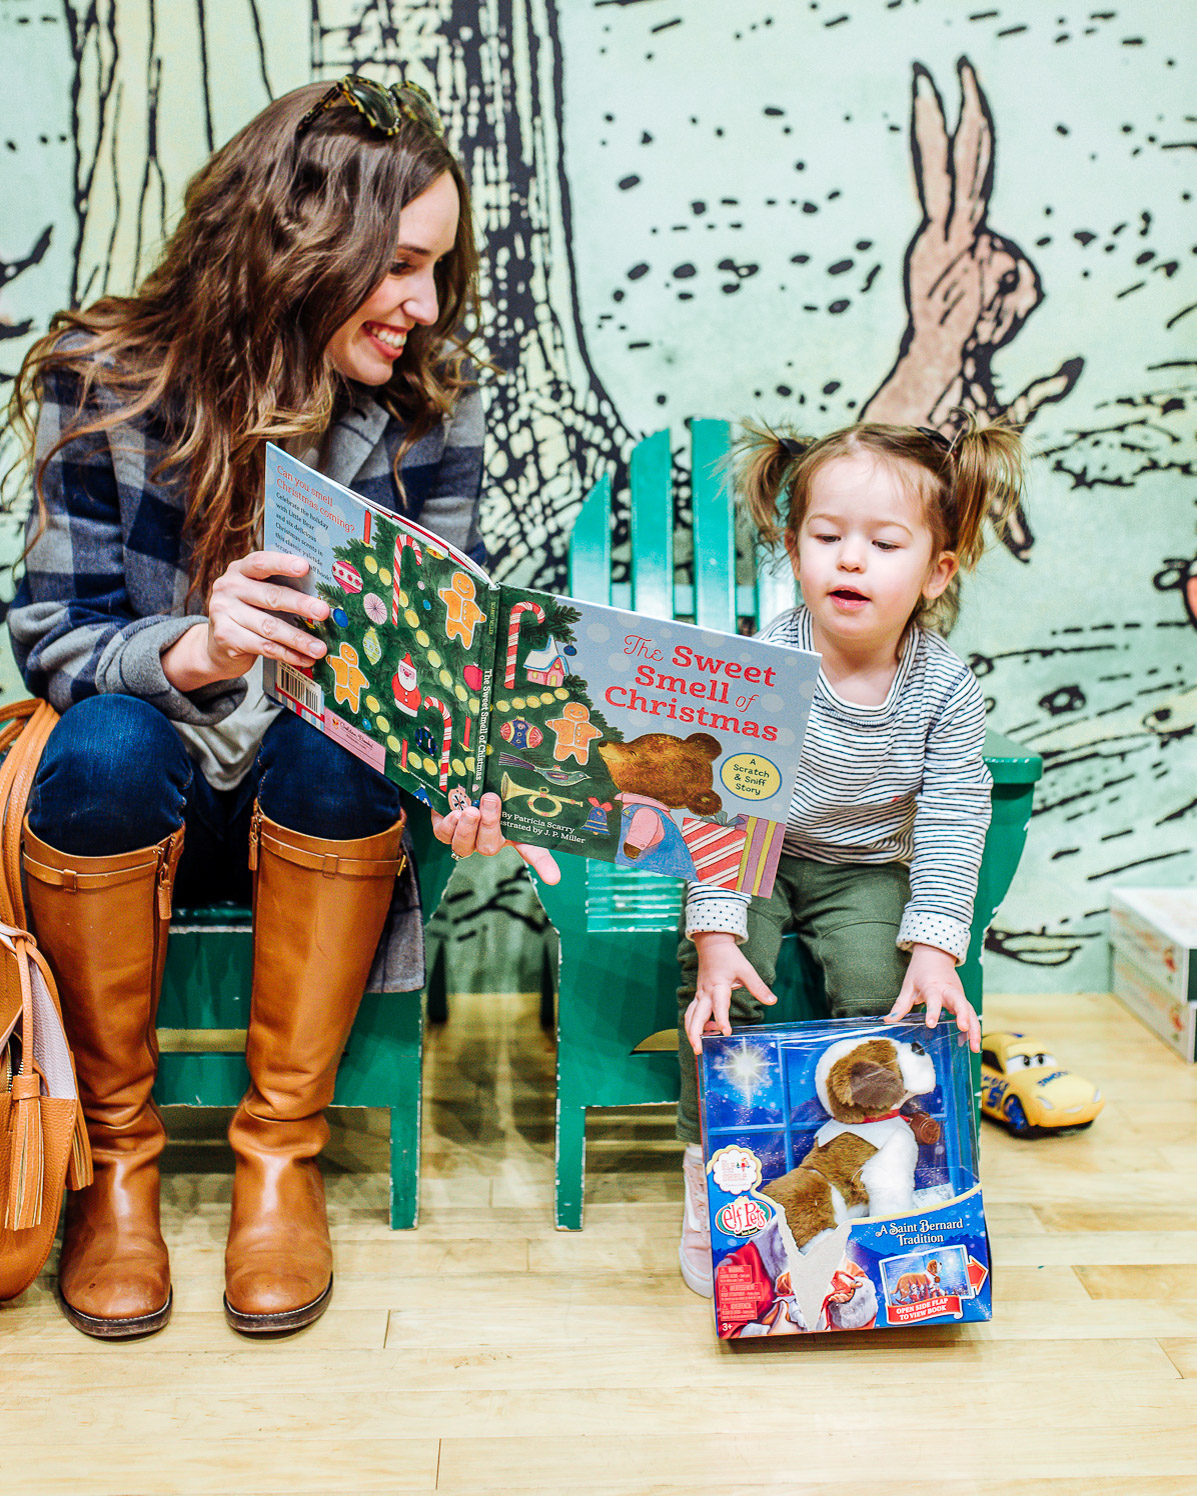 Kroger | New Family Holiday Traditions We're Starting + A Shopping Day in River Oaks featured by top Houston lifestyle blog Lone Star Looking Glass